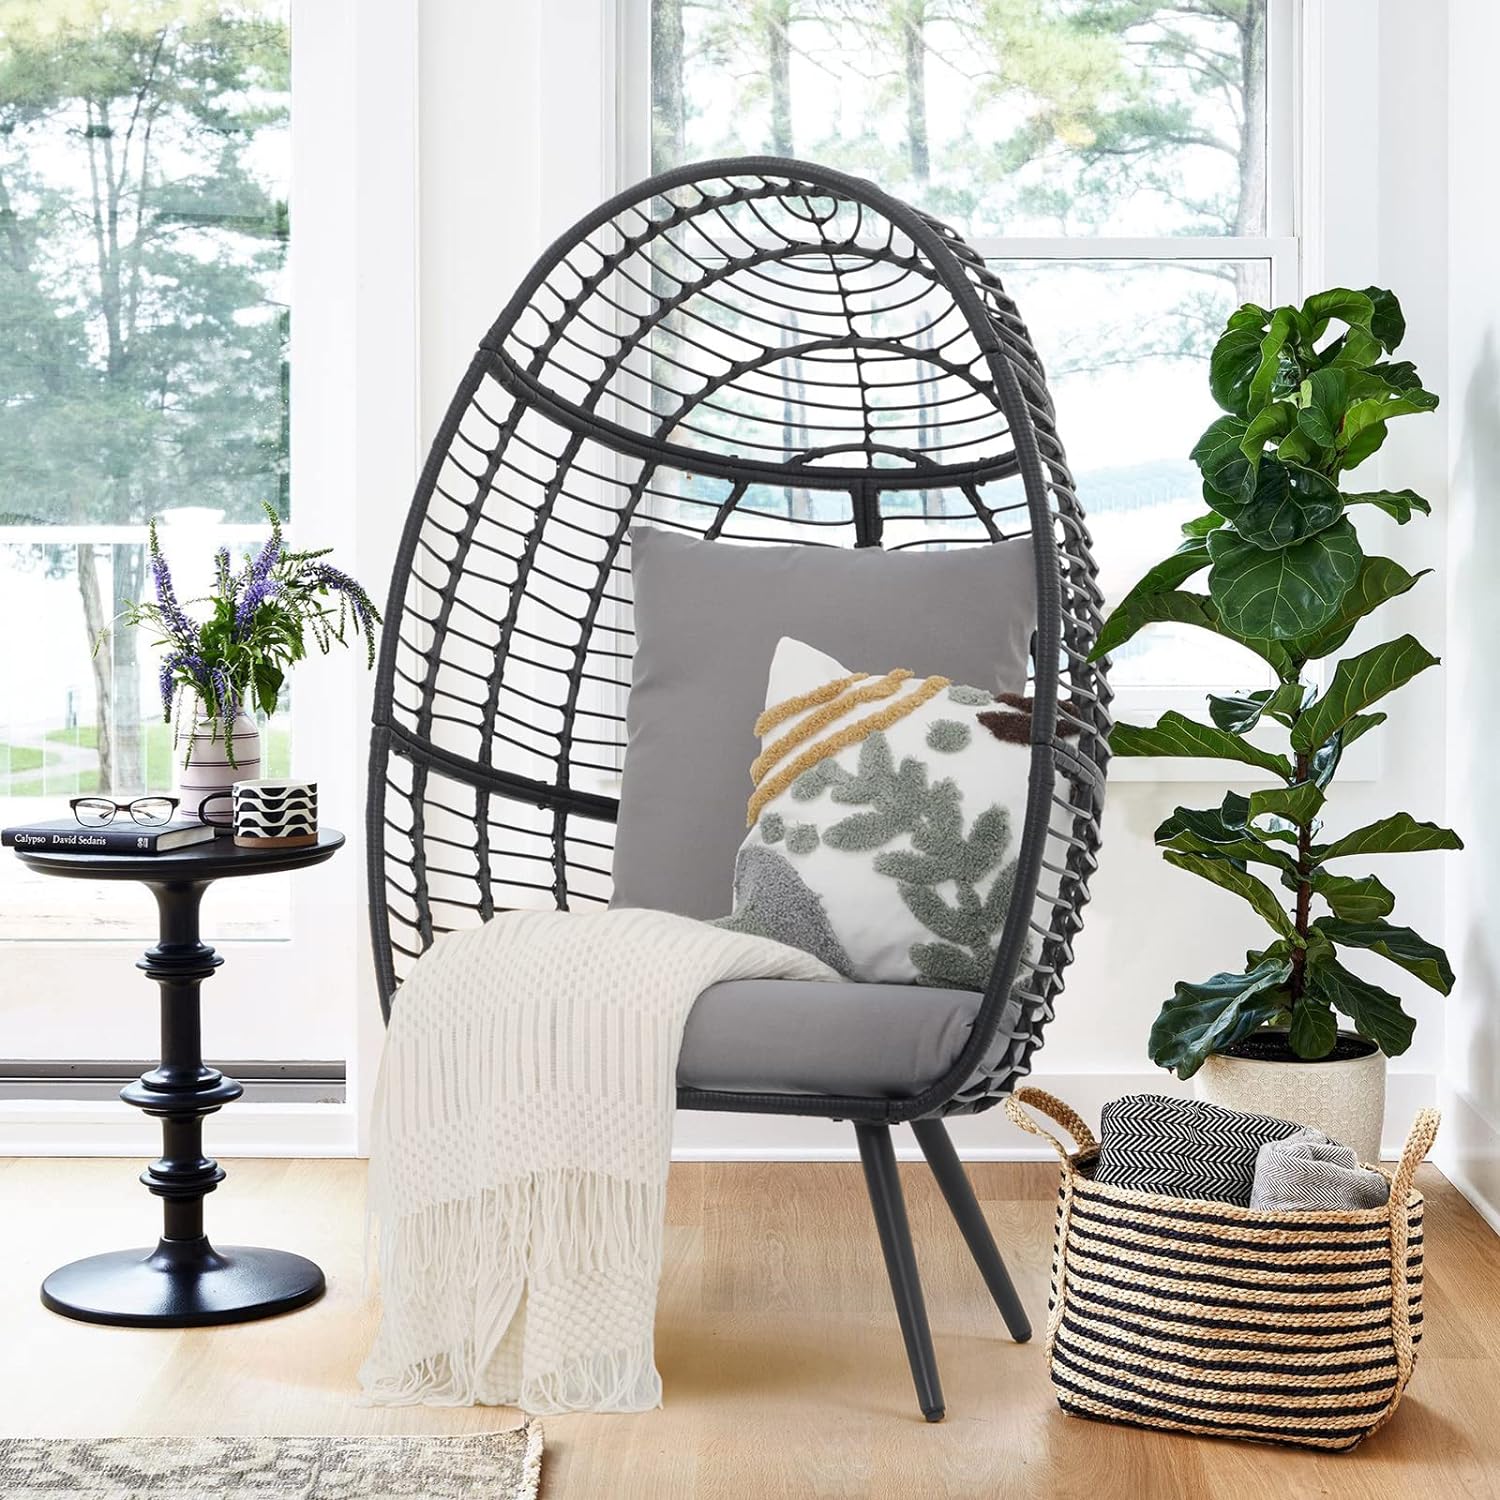 Patiorama Wicker Egg Chair Outdoor Indoor, Rattan Lounge Chair for Outside w/Legs Cushion, Basket Wicker Chair for Bedroom Living Room Front Porch Backyard Garden 350 lbs Capacity (Grey)